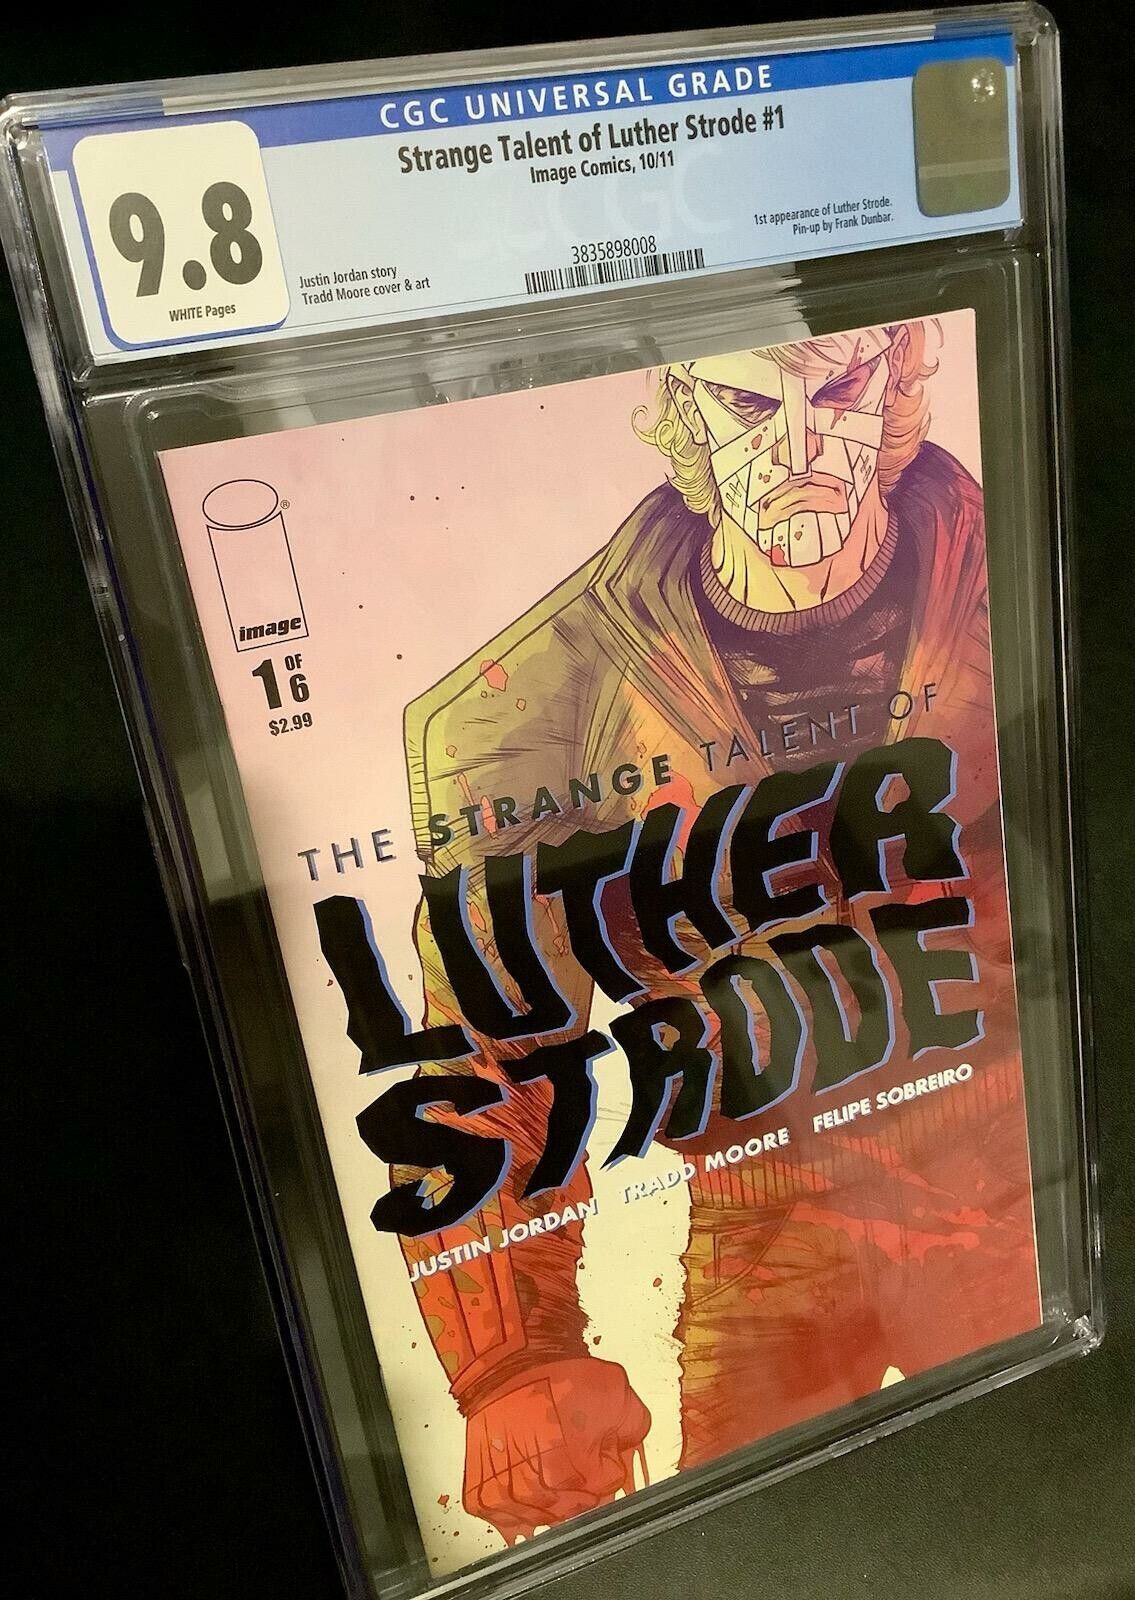 The Strange Talent of Luther Strode #1 1st print CGC 9.8 Image 2011 TRADD MOORE